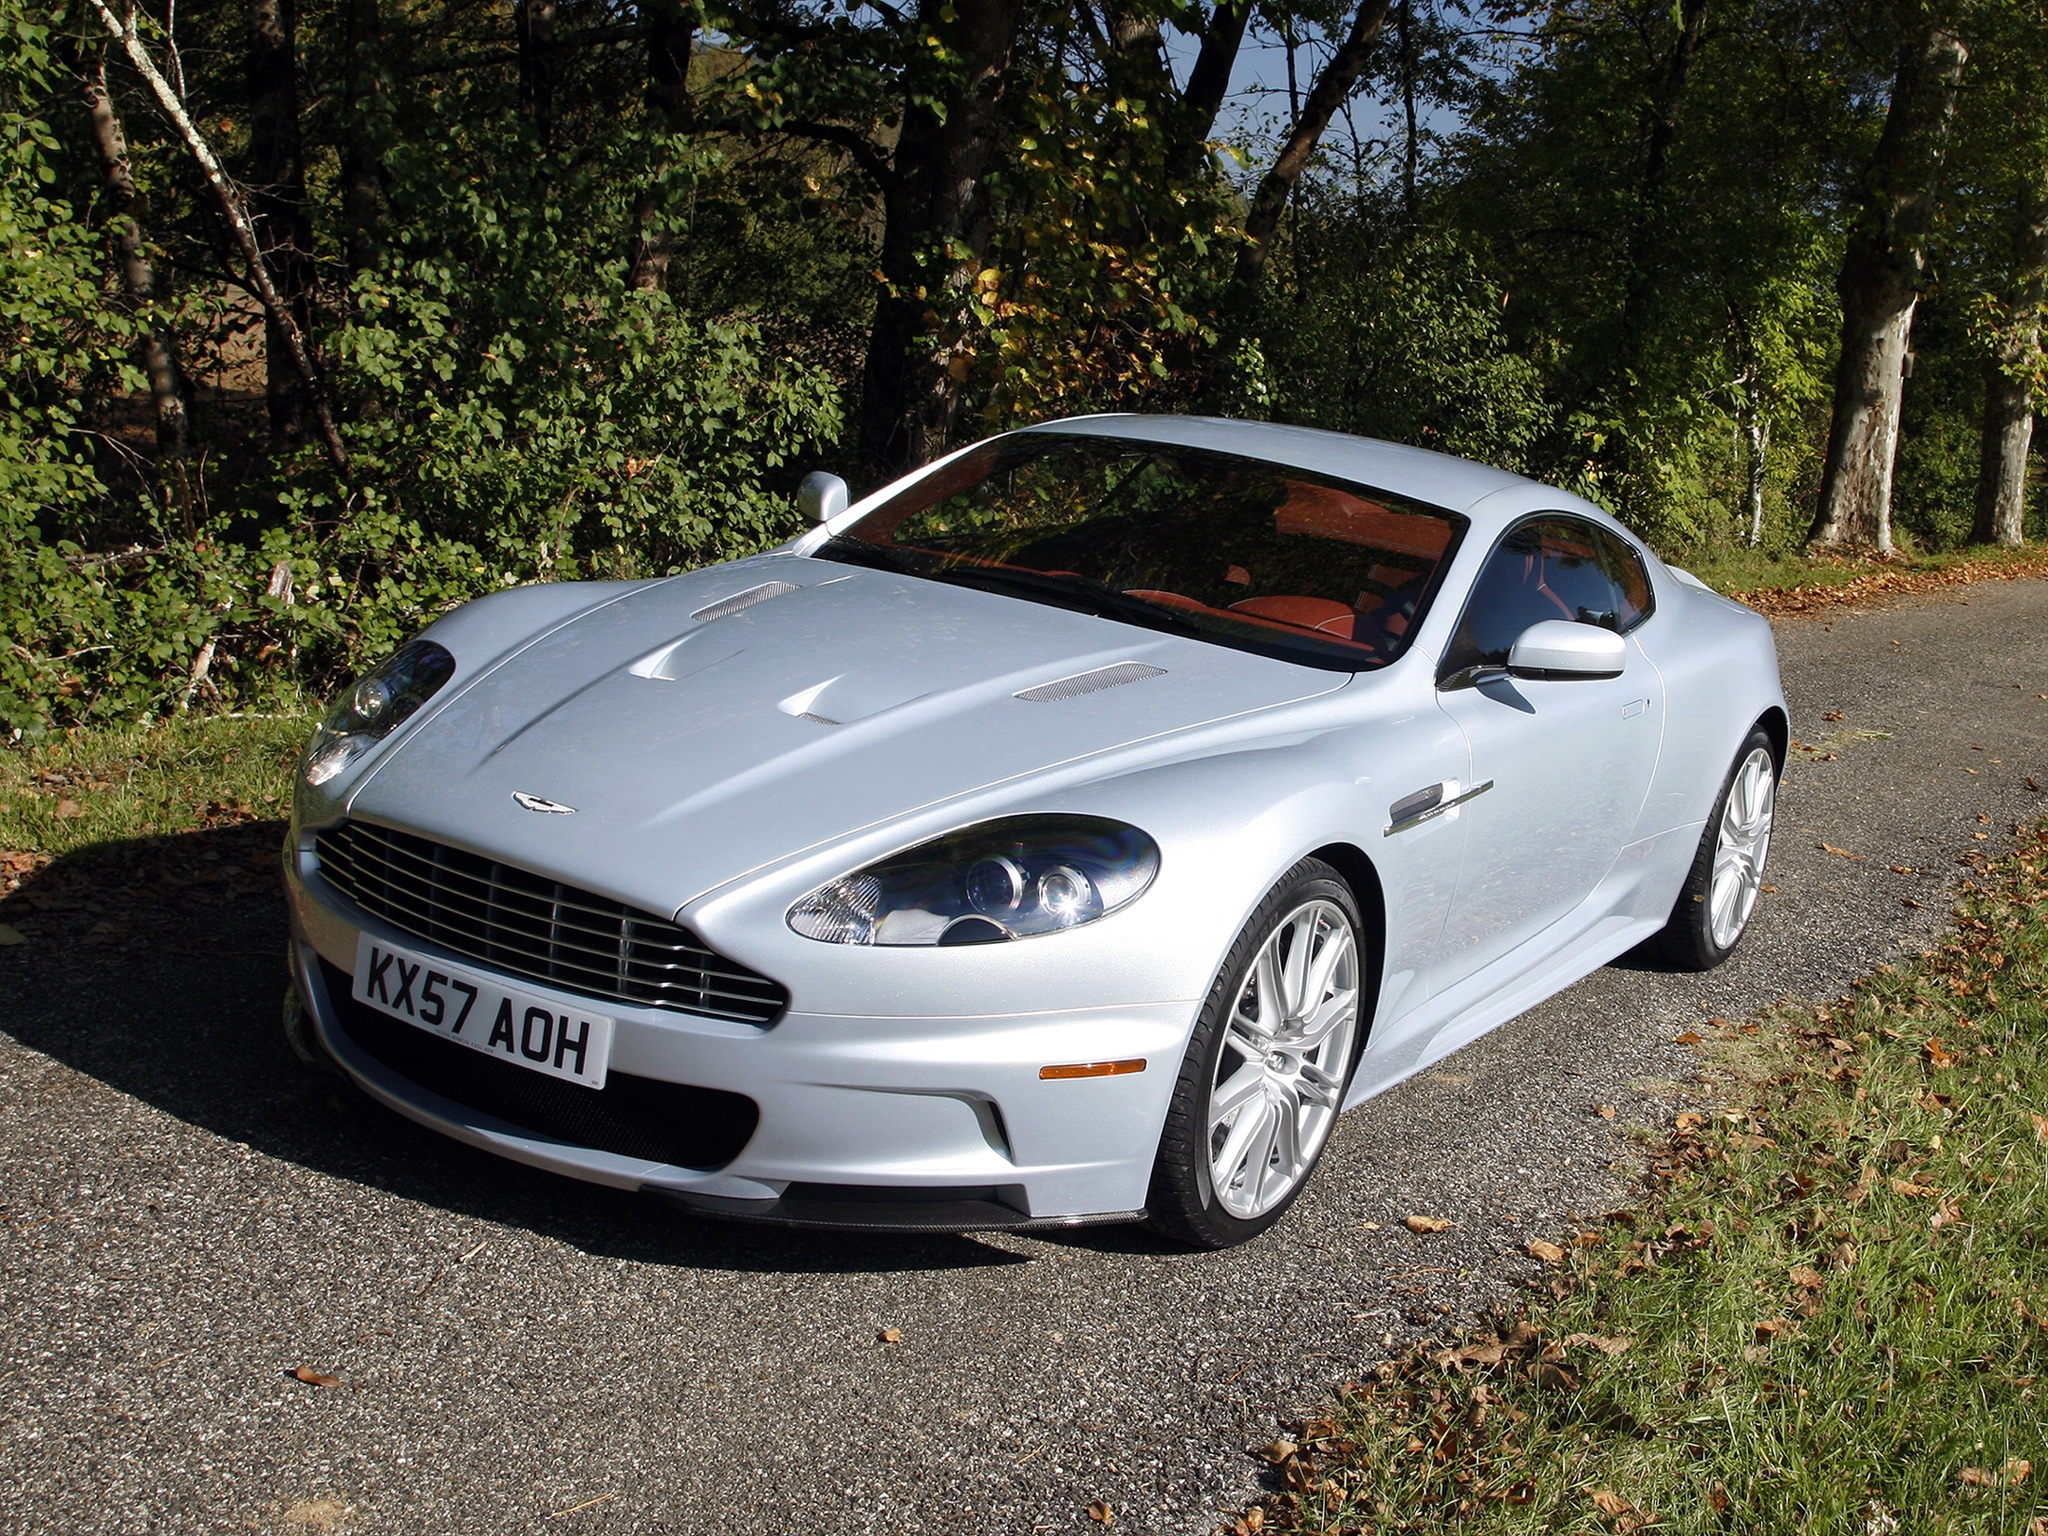 New Lock Screen Wallpapers trees, grass, aston martin, cars, white, front view, 2008, aston martin dbs